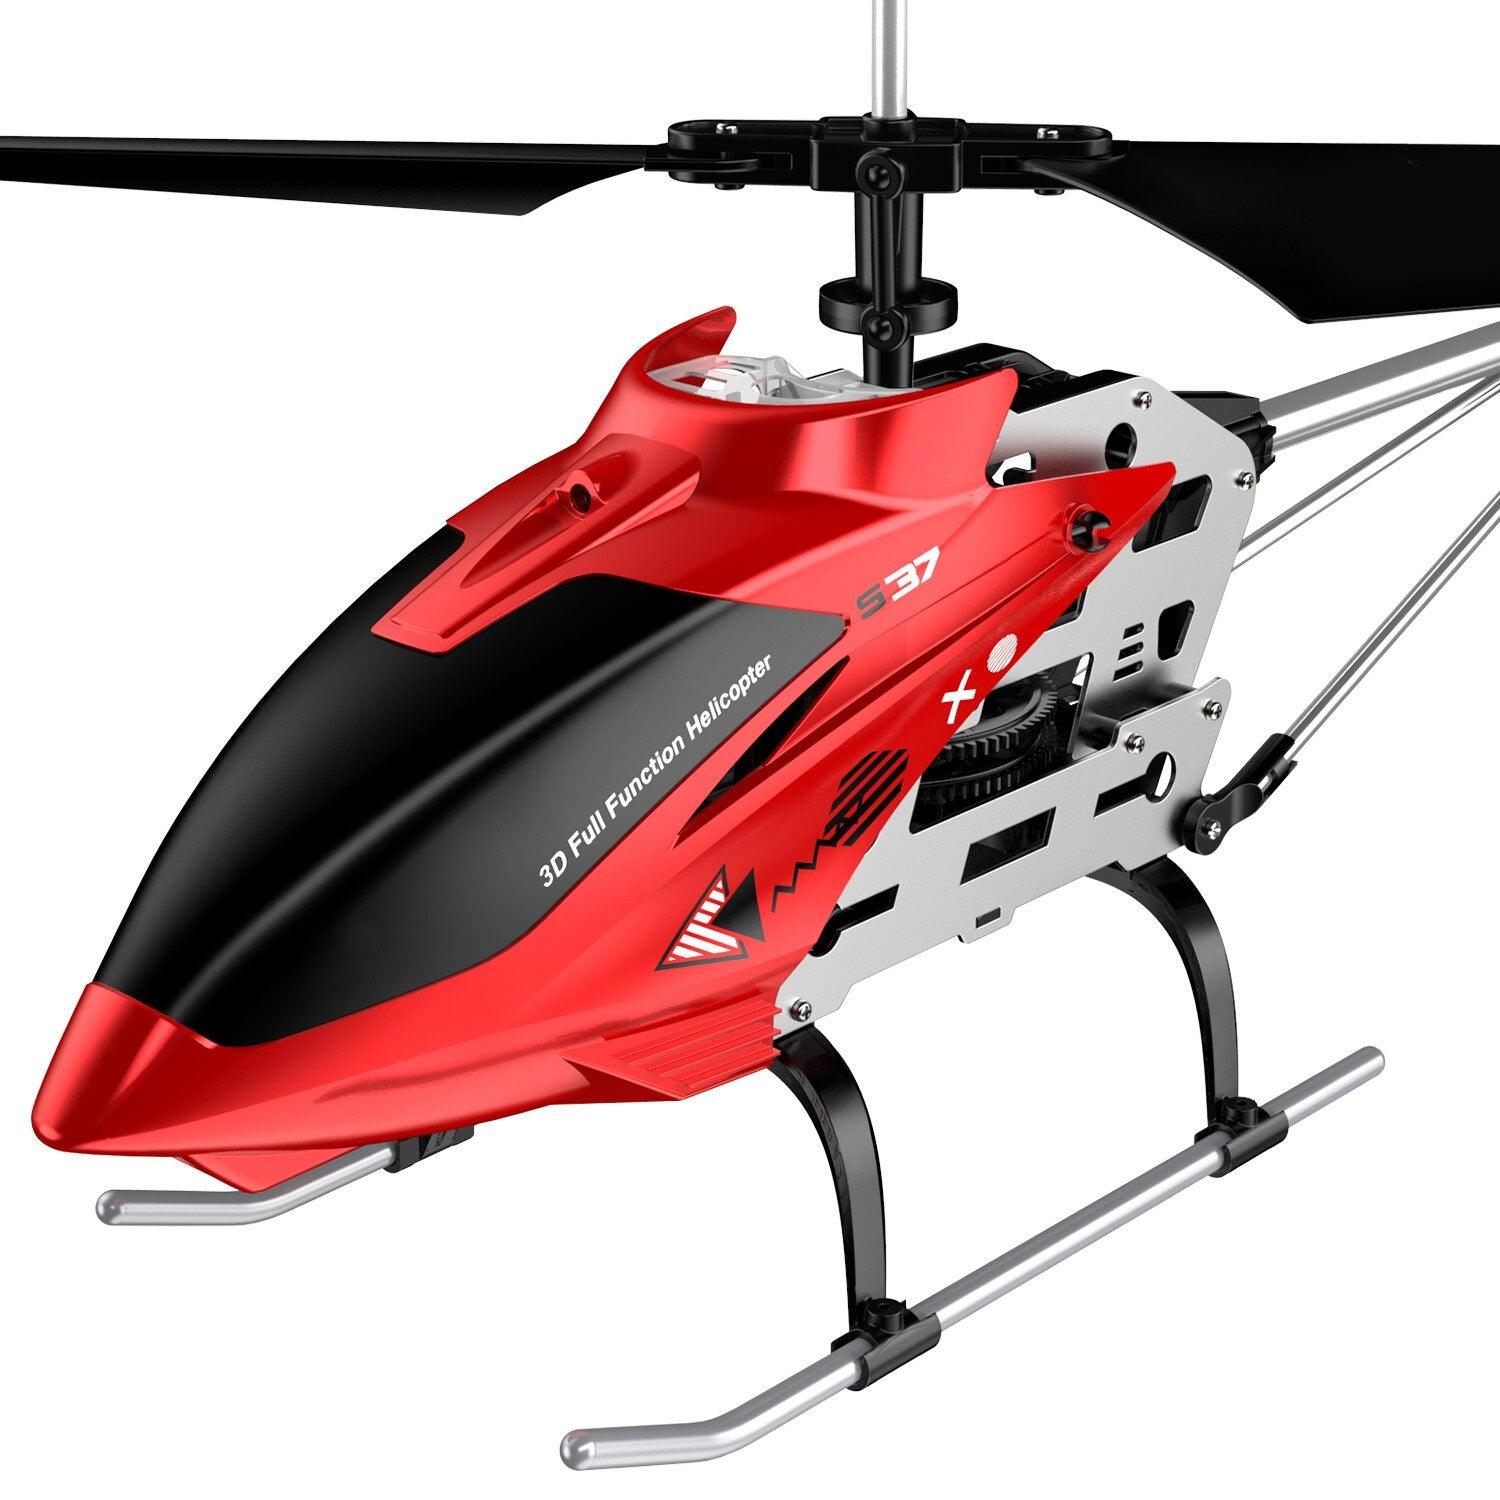 SYMA RC Helicopter S37 Aircraft - with Altitude hold, 3.5 Channel